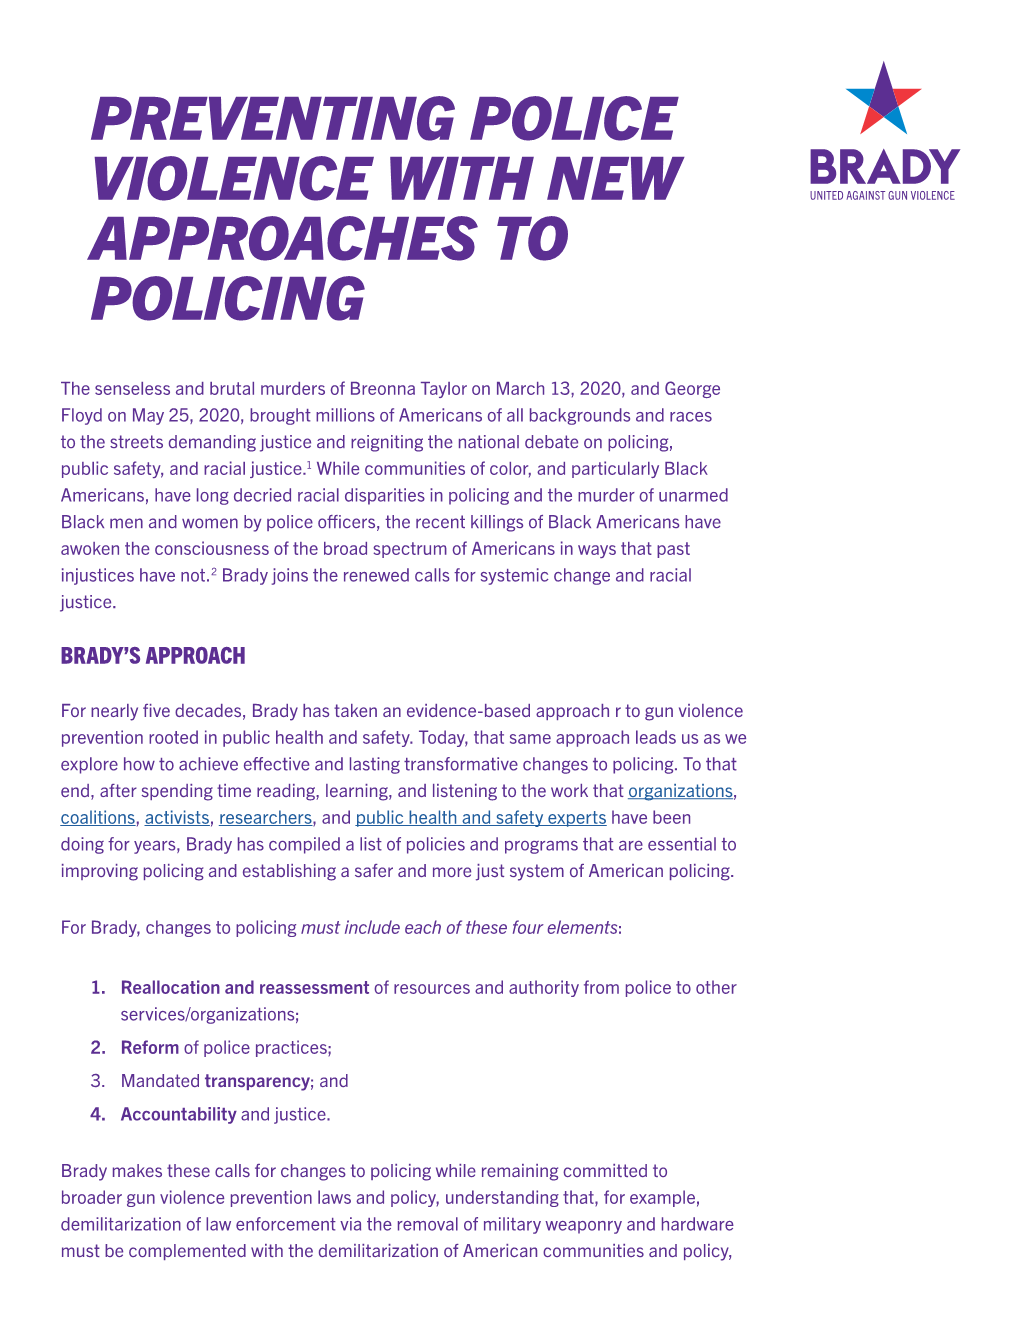 Preventing Police Violence with New Approaches to Policing